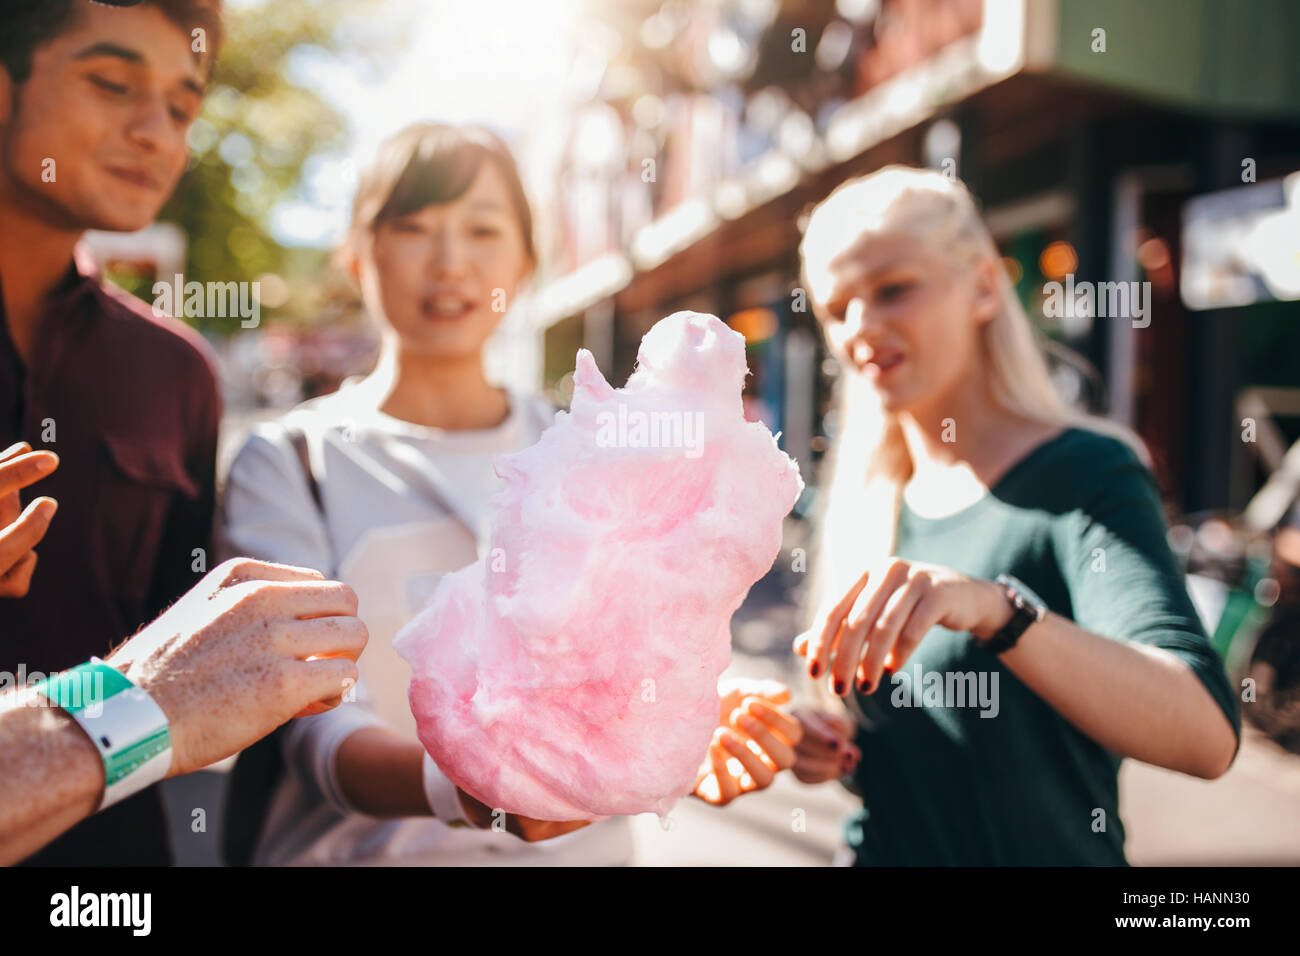 Three young people sharing cotton candyfloss at amusement park. Group of friends eating cotton candy together outdoors. Stock Photo